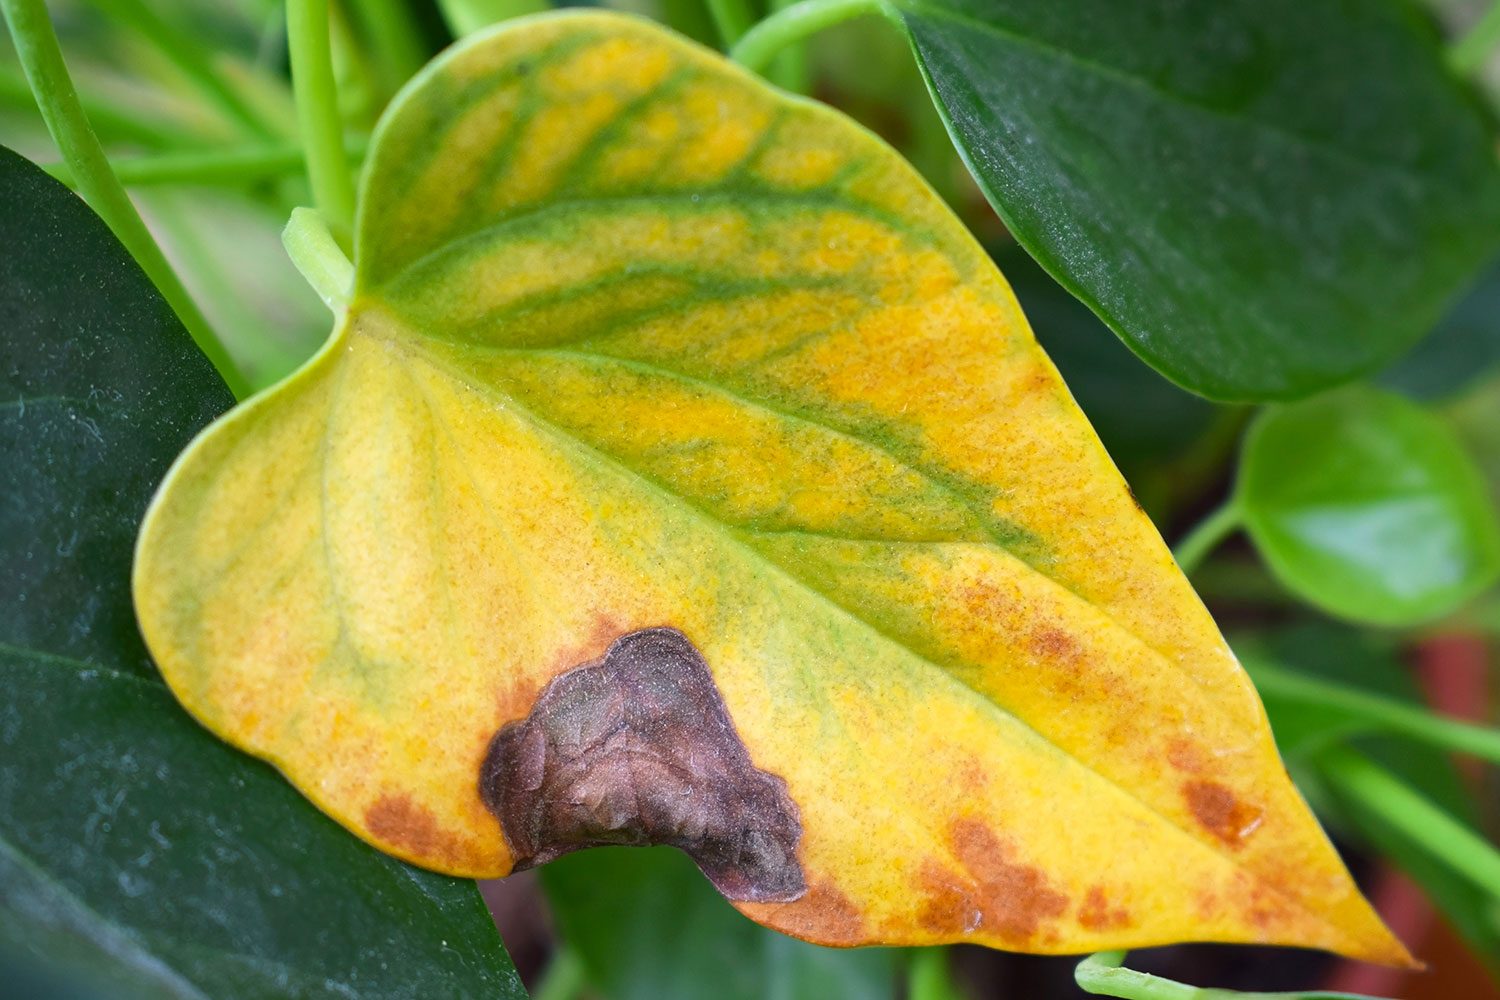 Sun Spots Or Withering Damage on Anthurium Leaves on an inside house plant